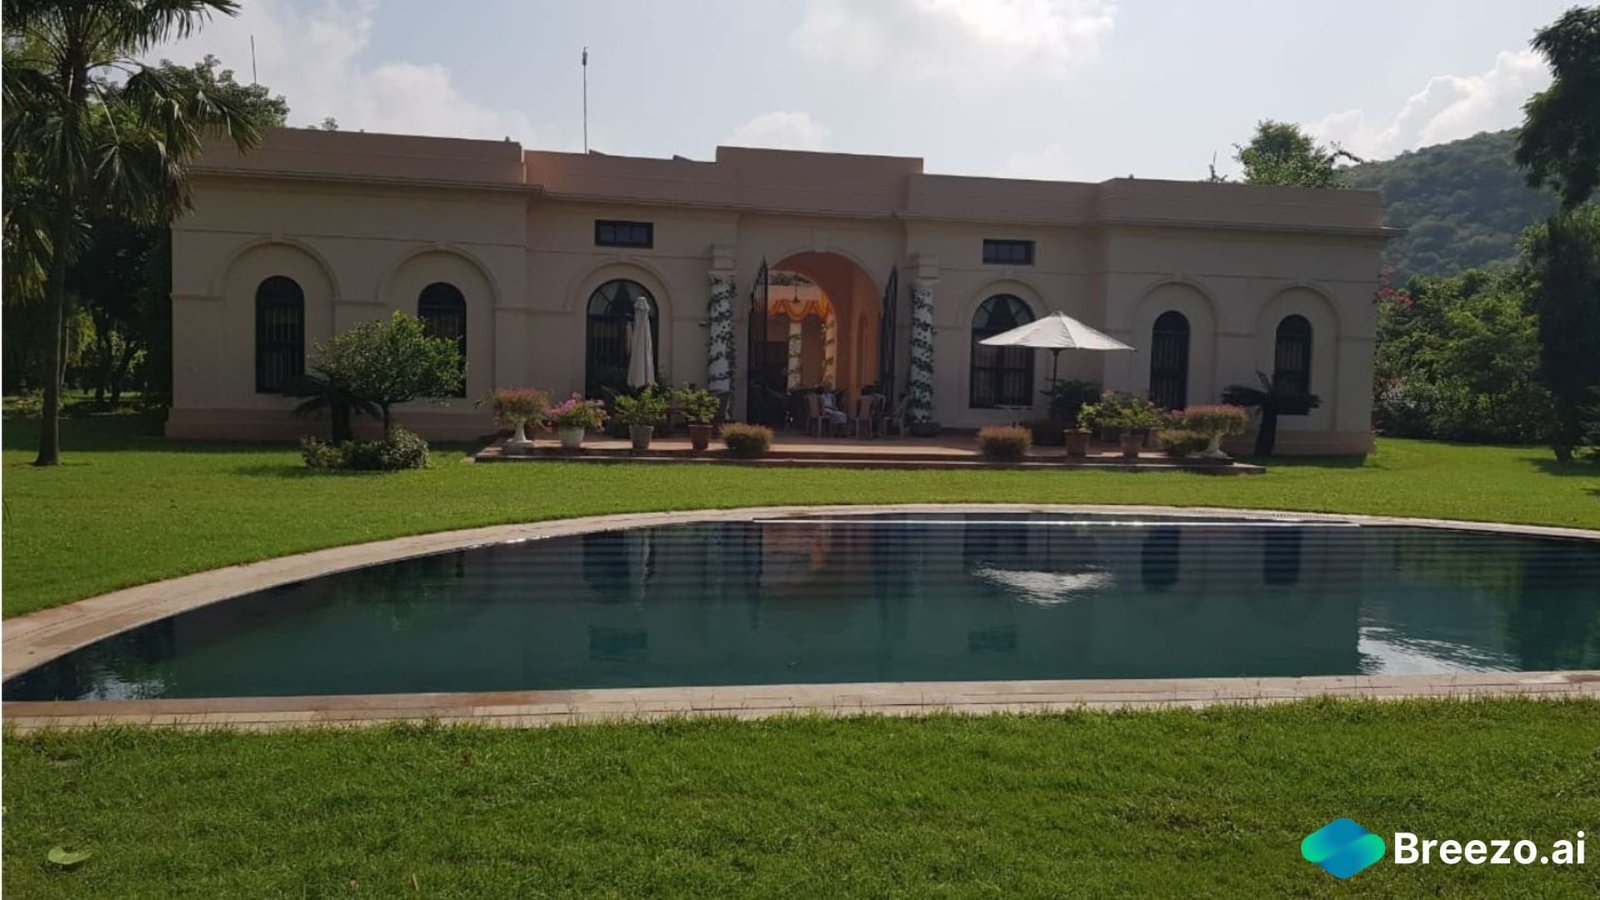 Farmhouse with retro furniture and lush green lawns - ideal film shoot location in Delhi NCR, Gurgaon, and Noida.